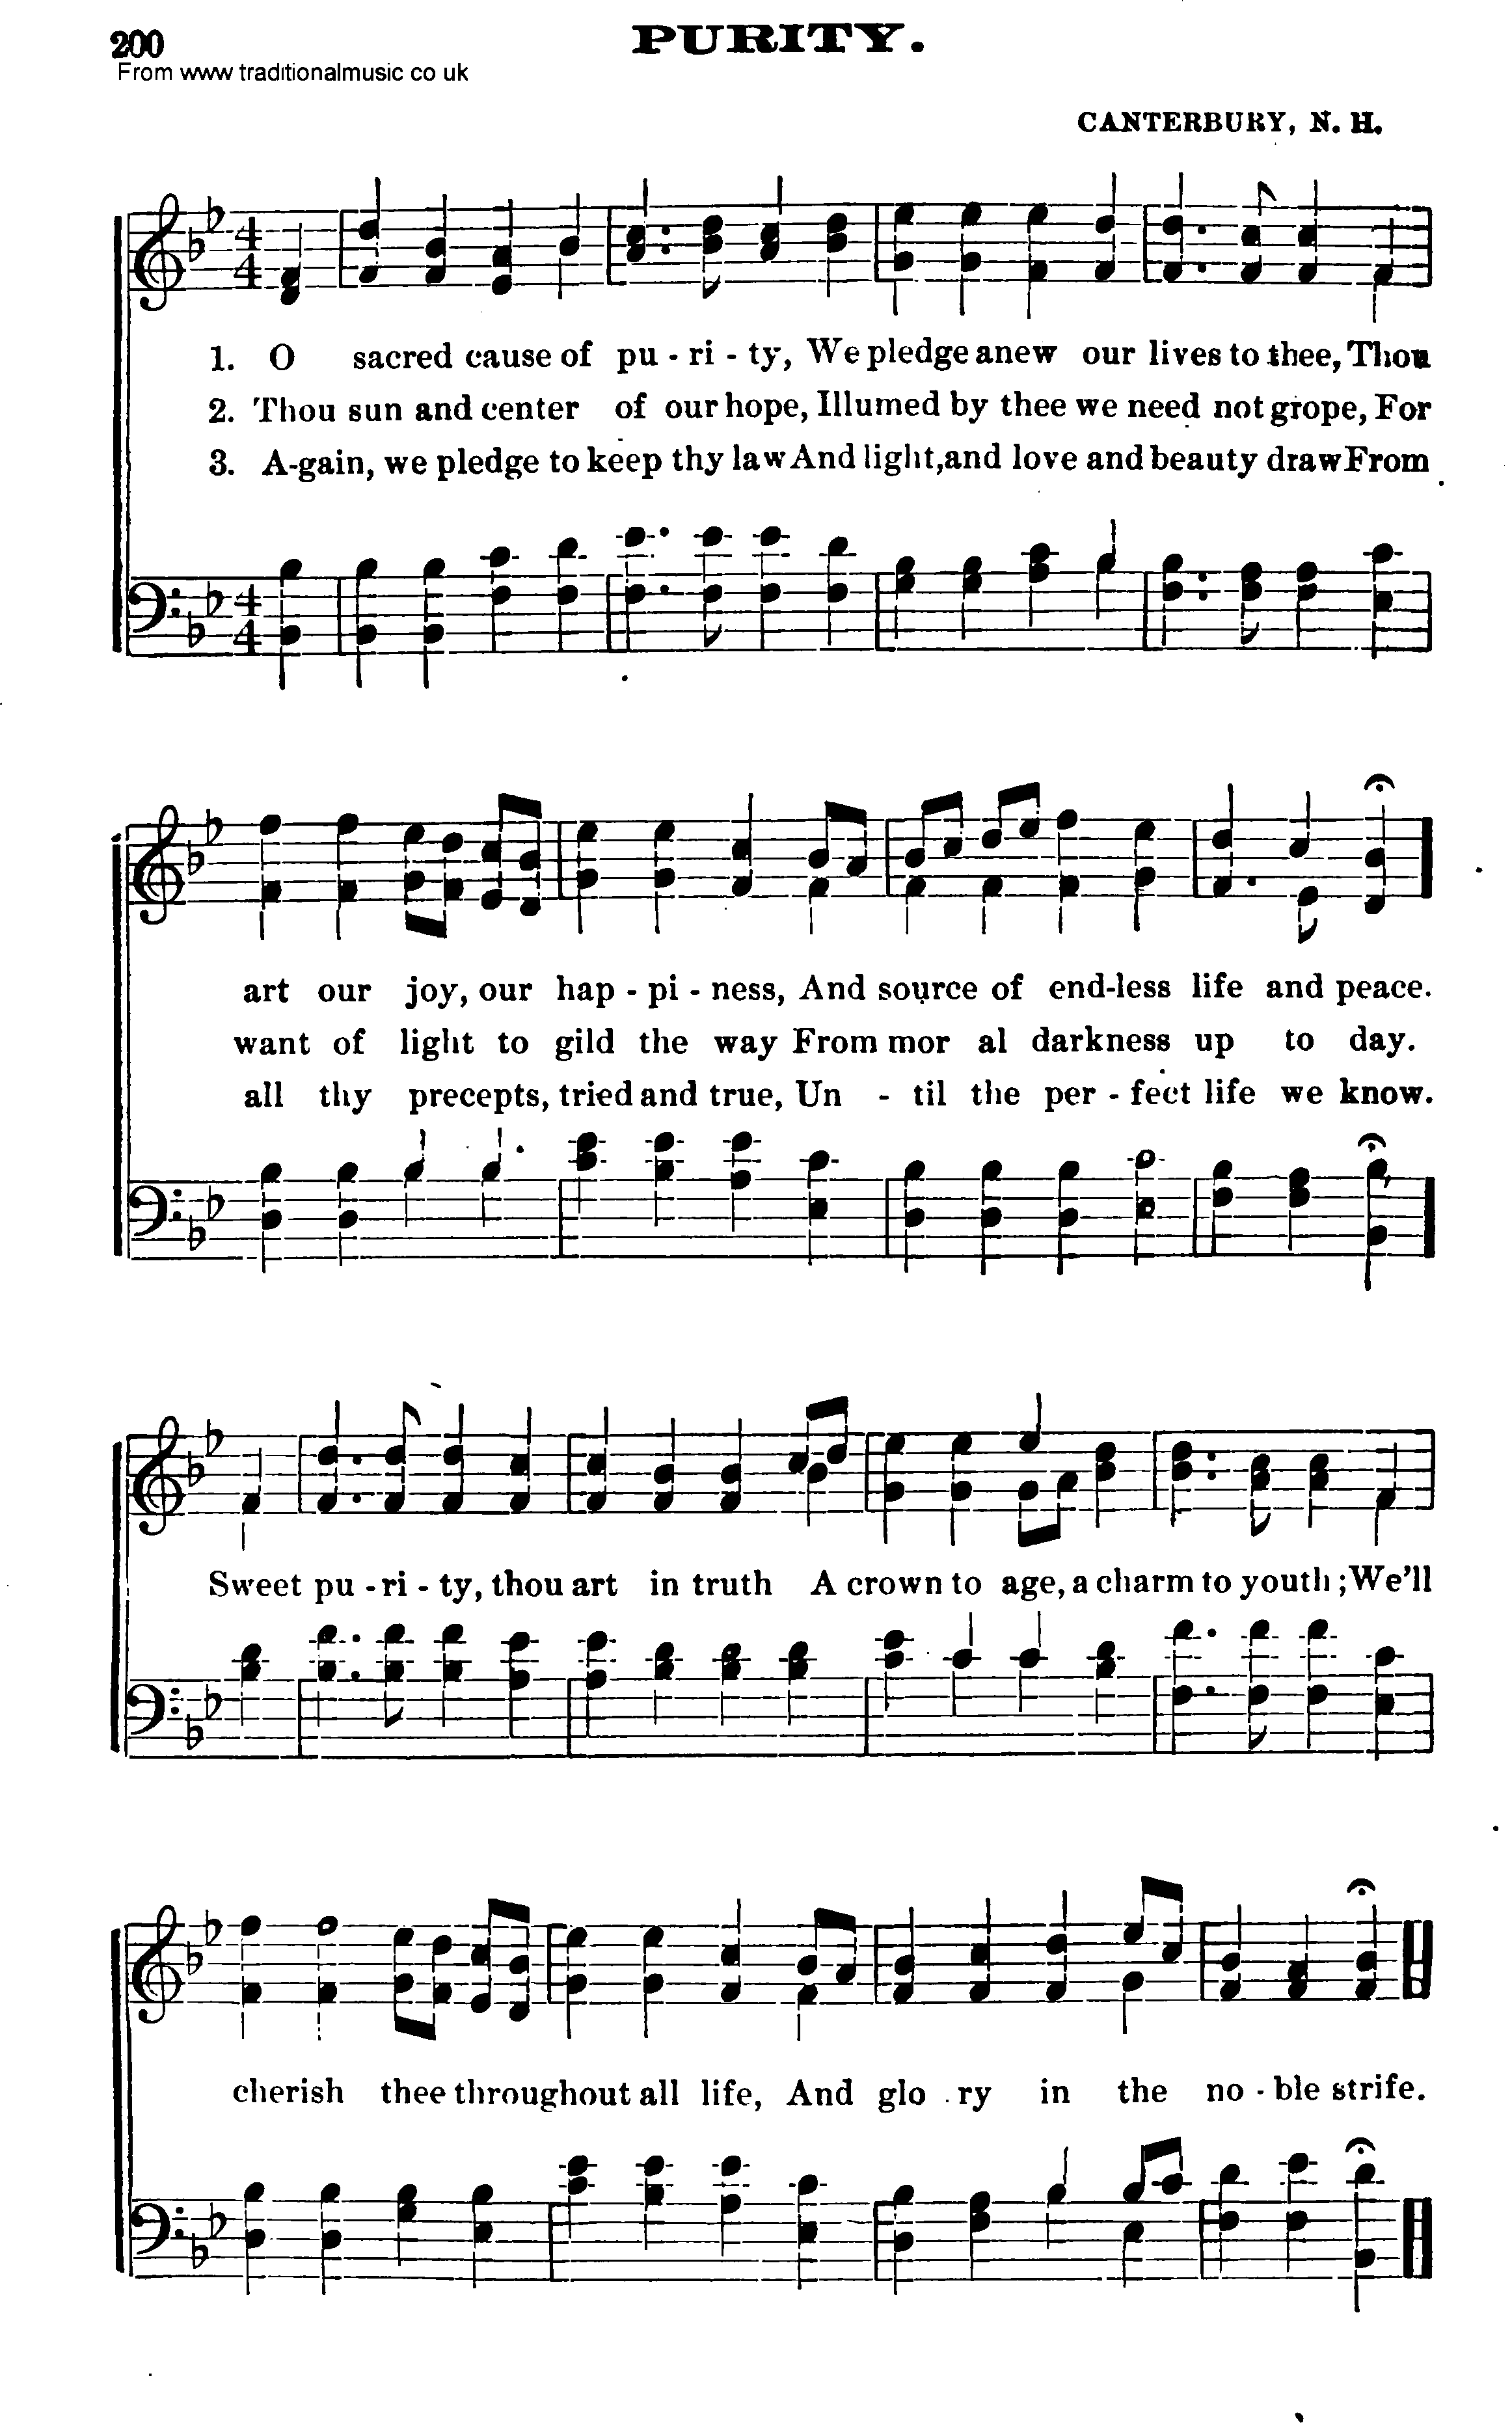 Shaker Music collection, Hymn: Purity, sheetmusic and PDF